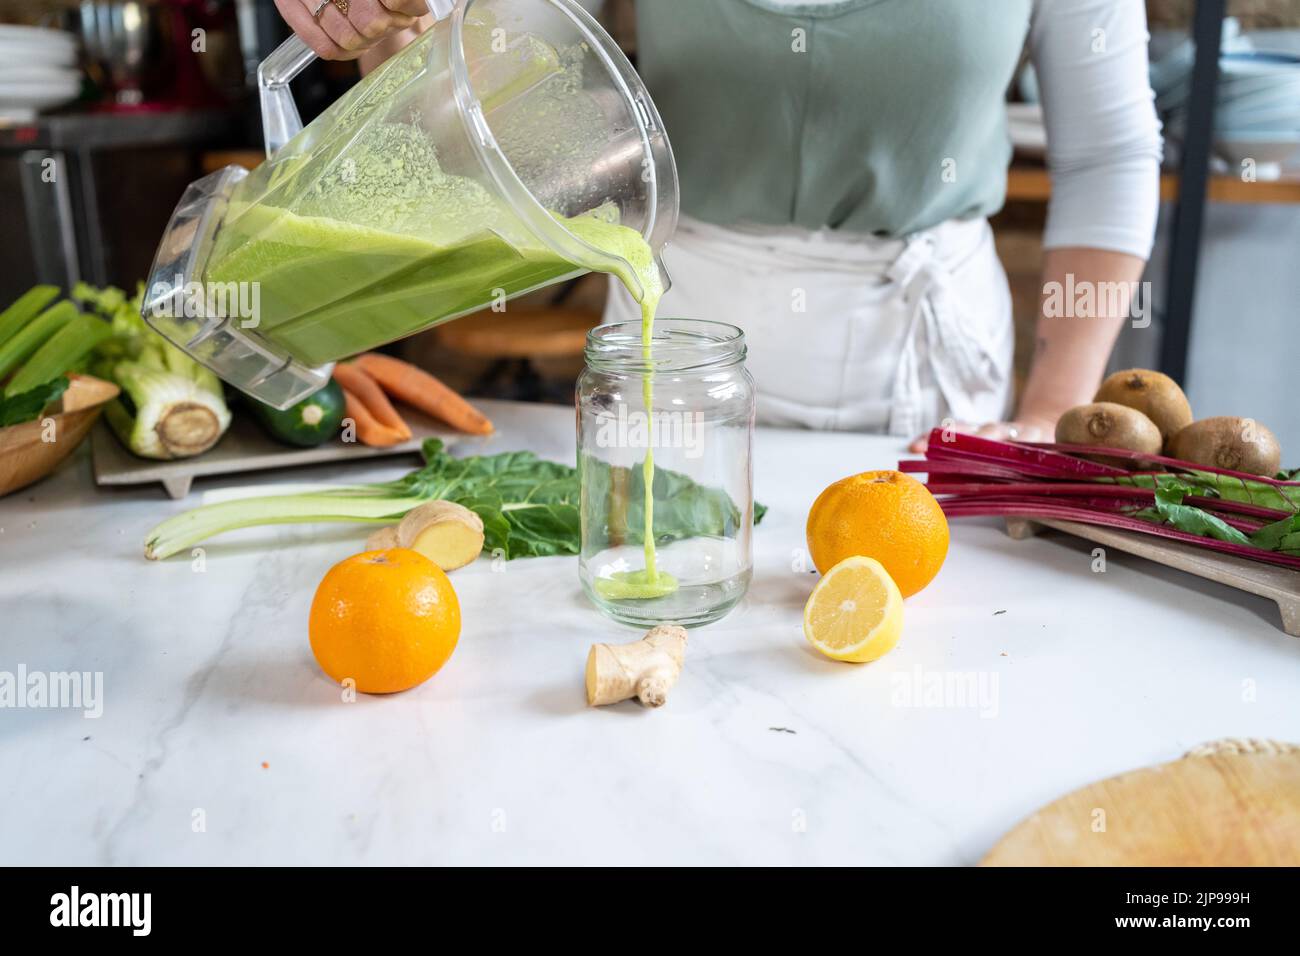 healthy diet, preparation, smoothie, food processor, healthy, healthy food, low fat, preparations, smoothies, blender, food processors, mixer Stock Photo